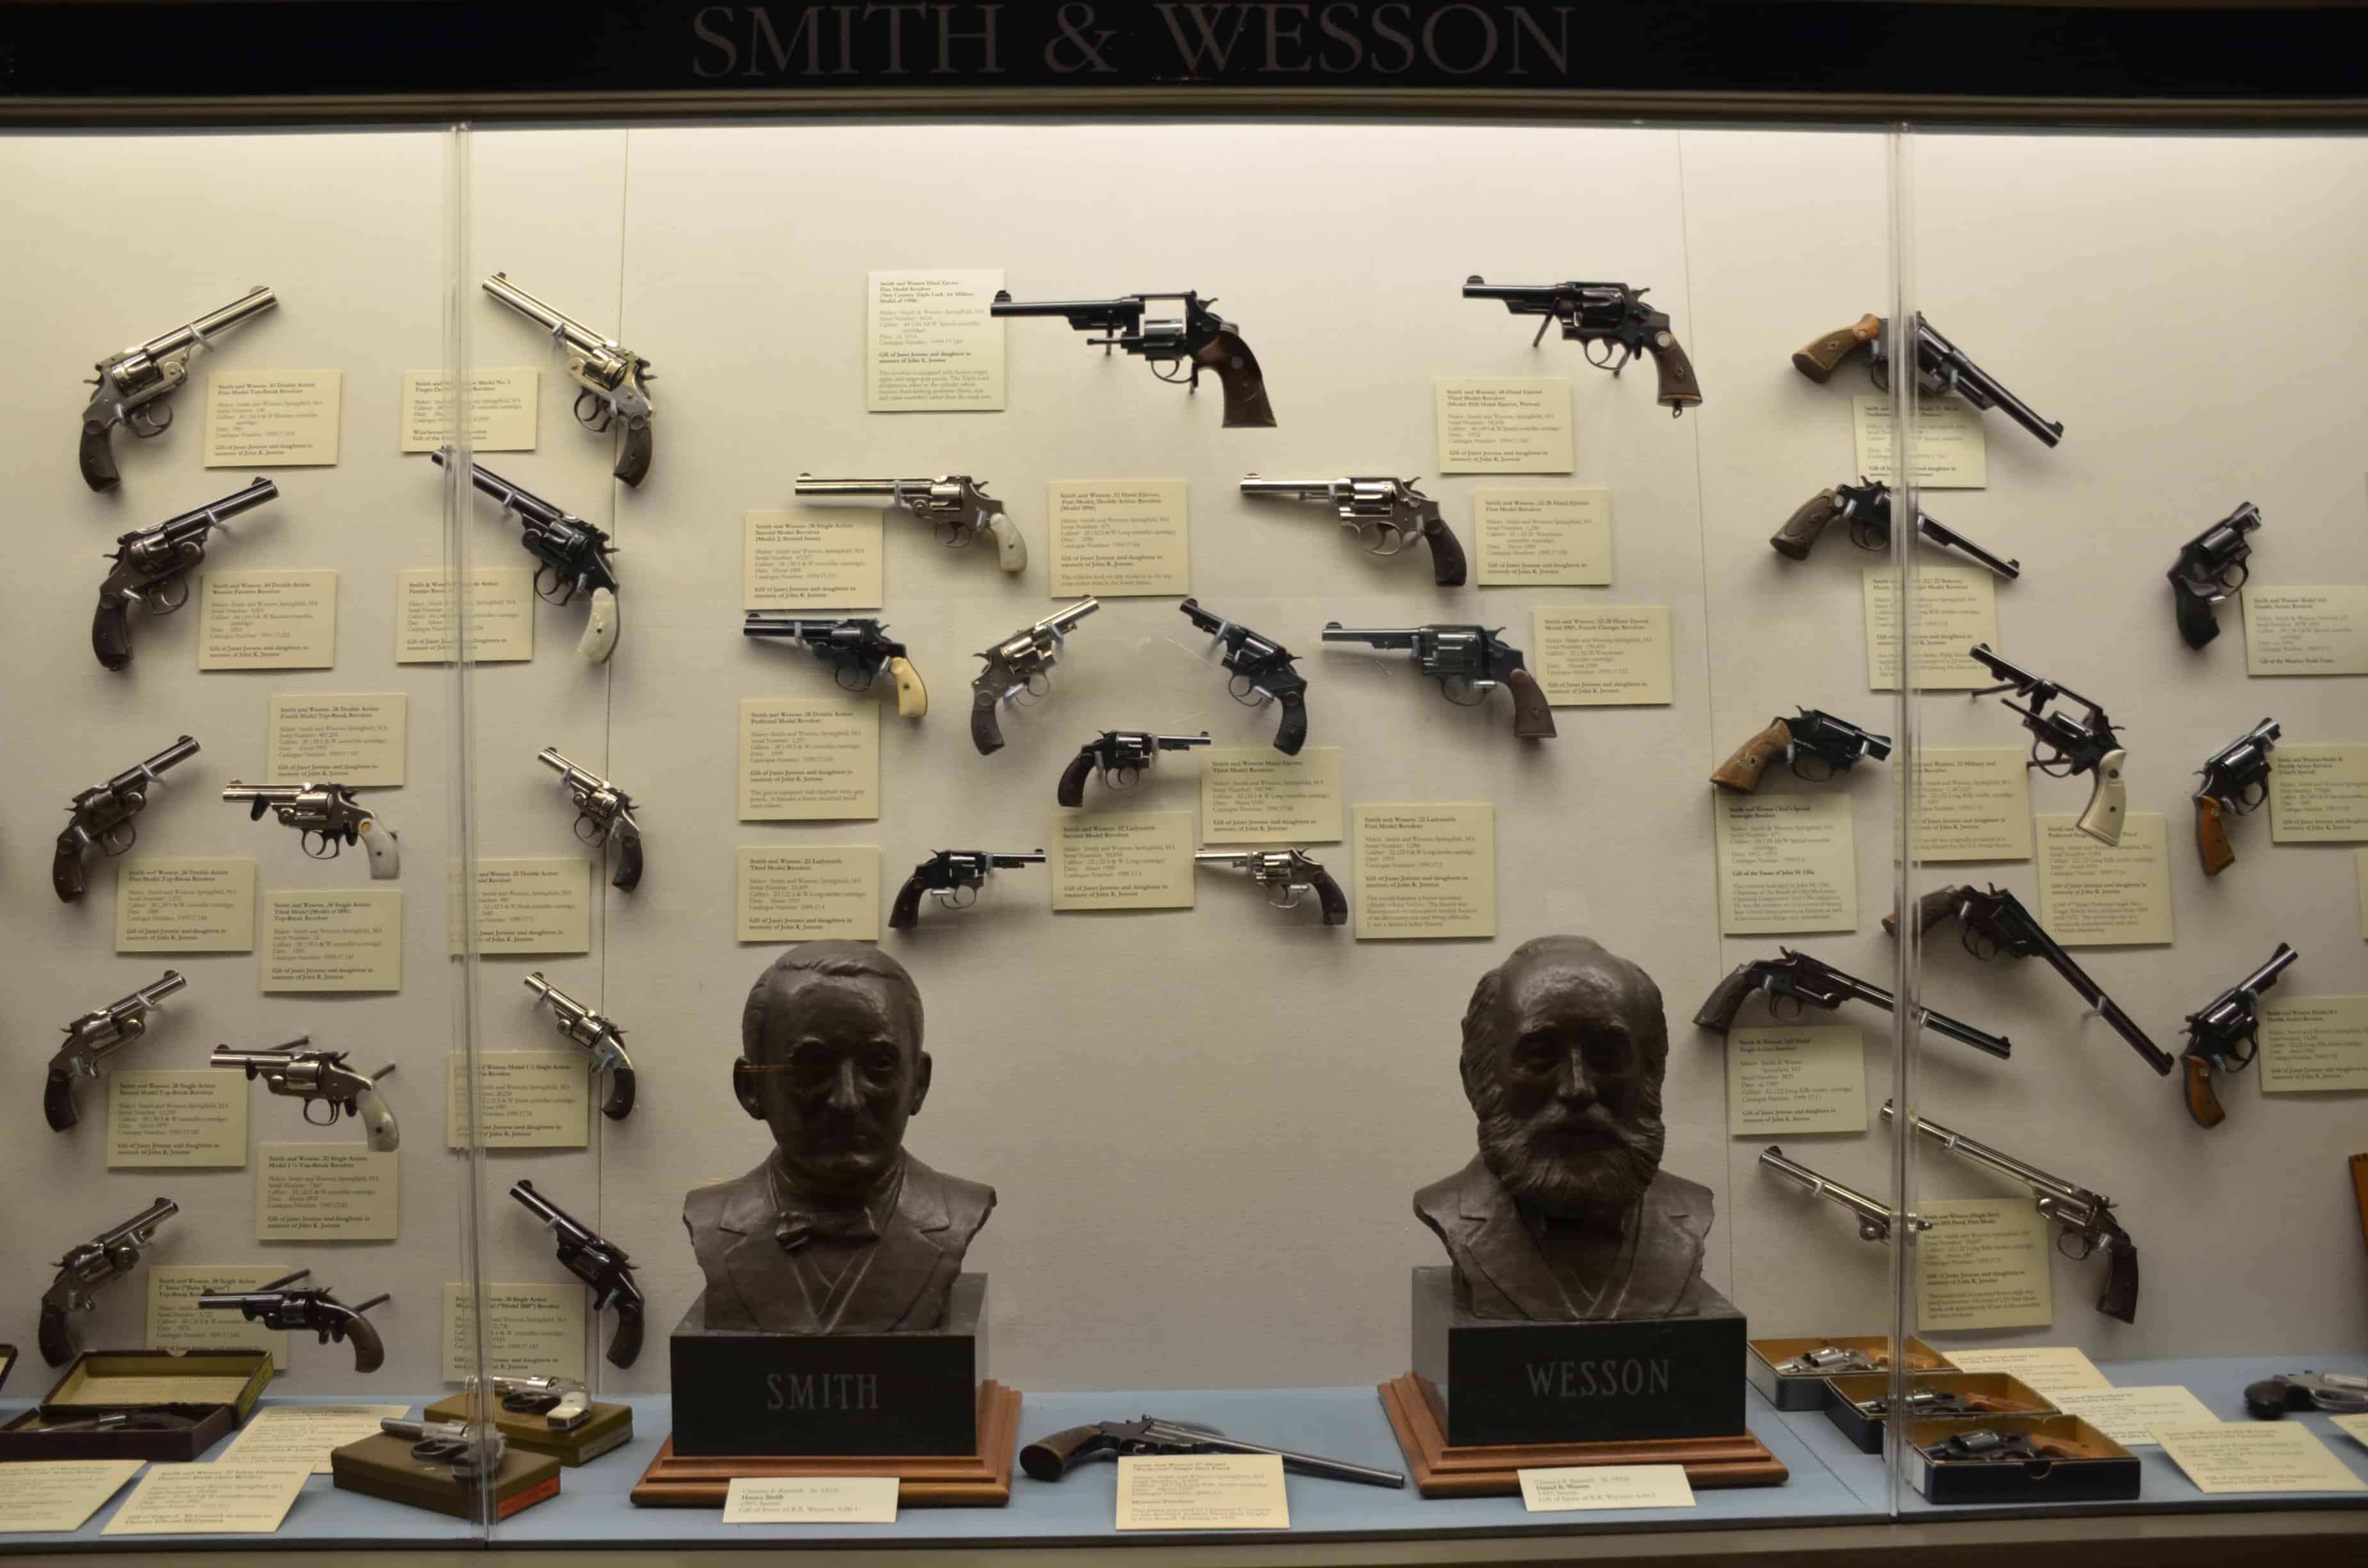 Smith & Wesson display at the Cody Firearms Museum